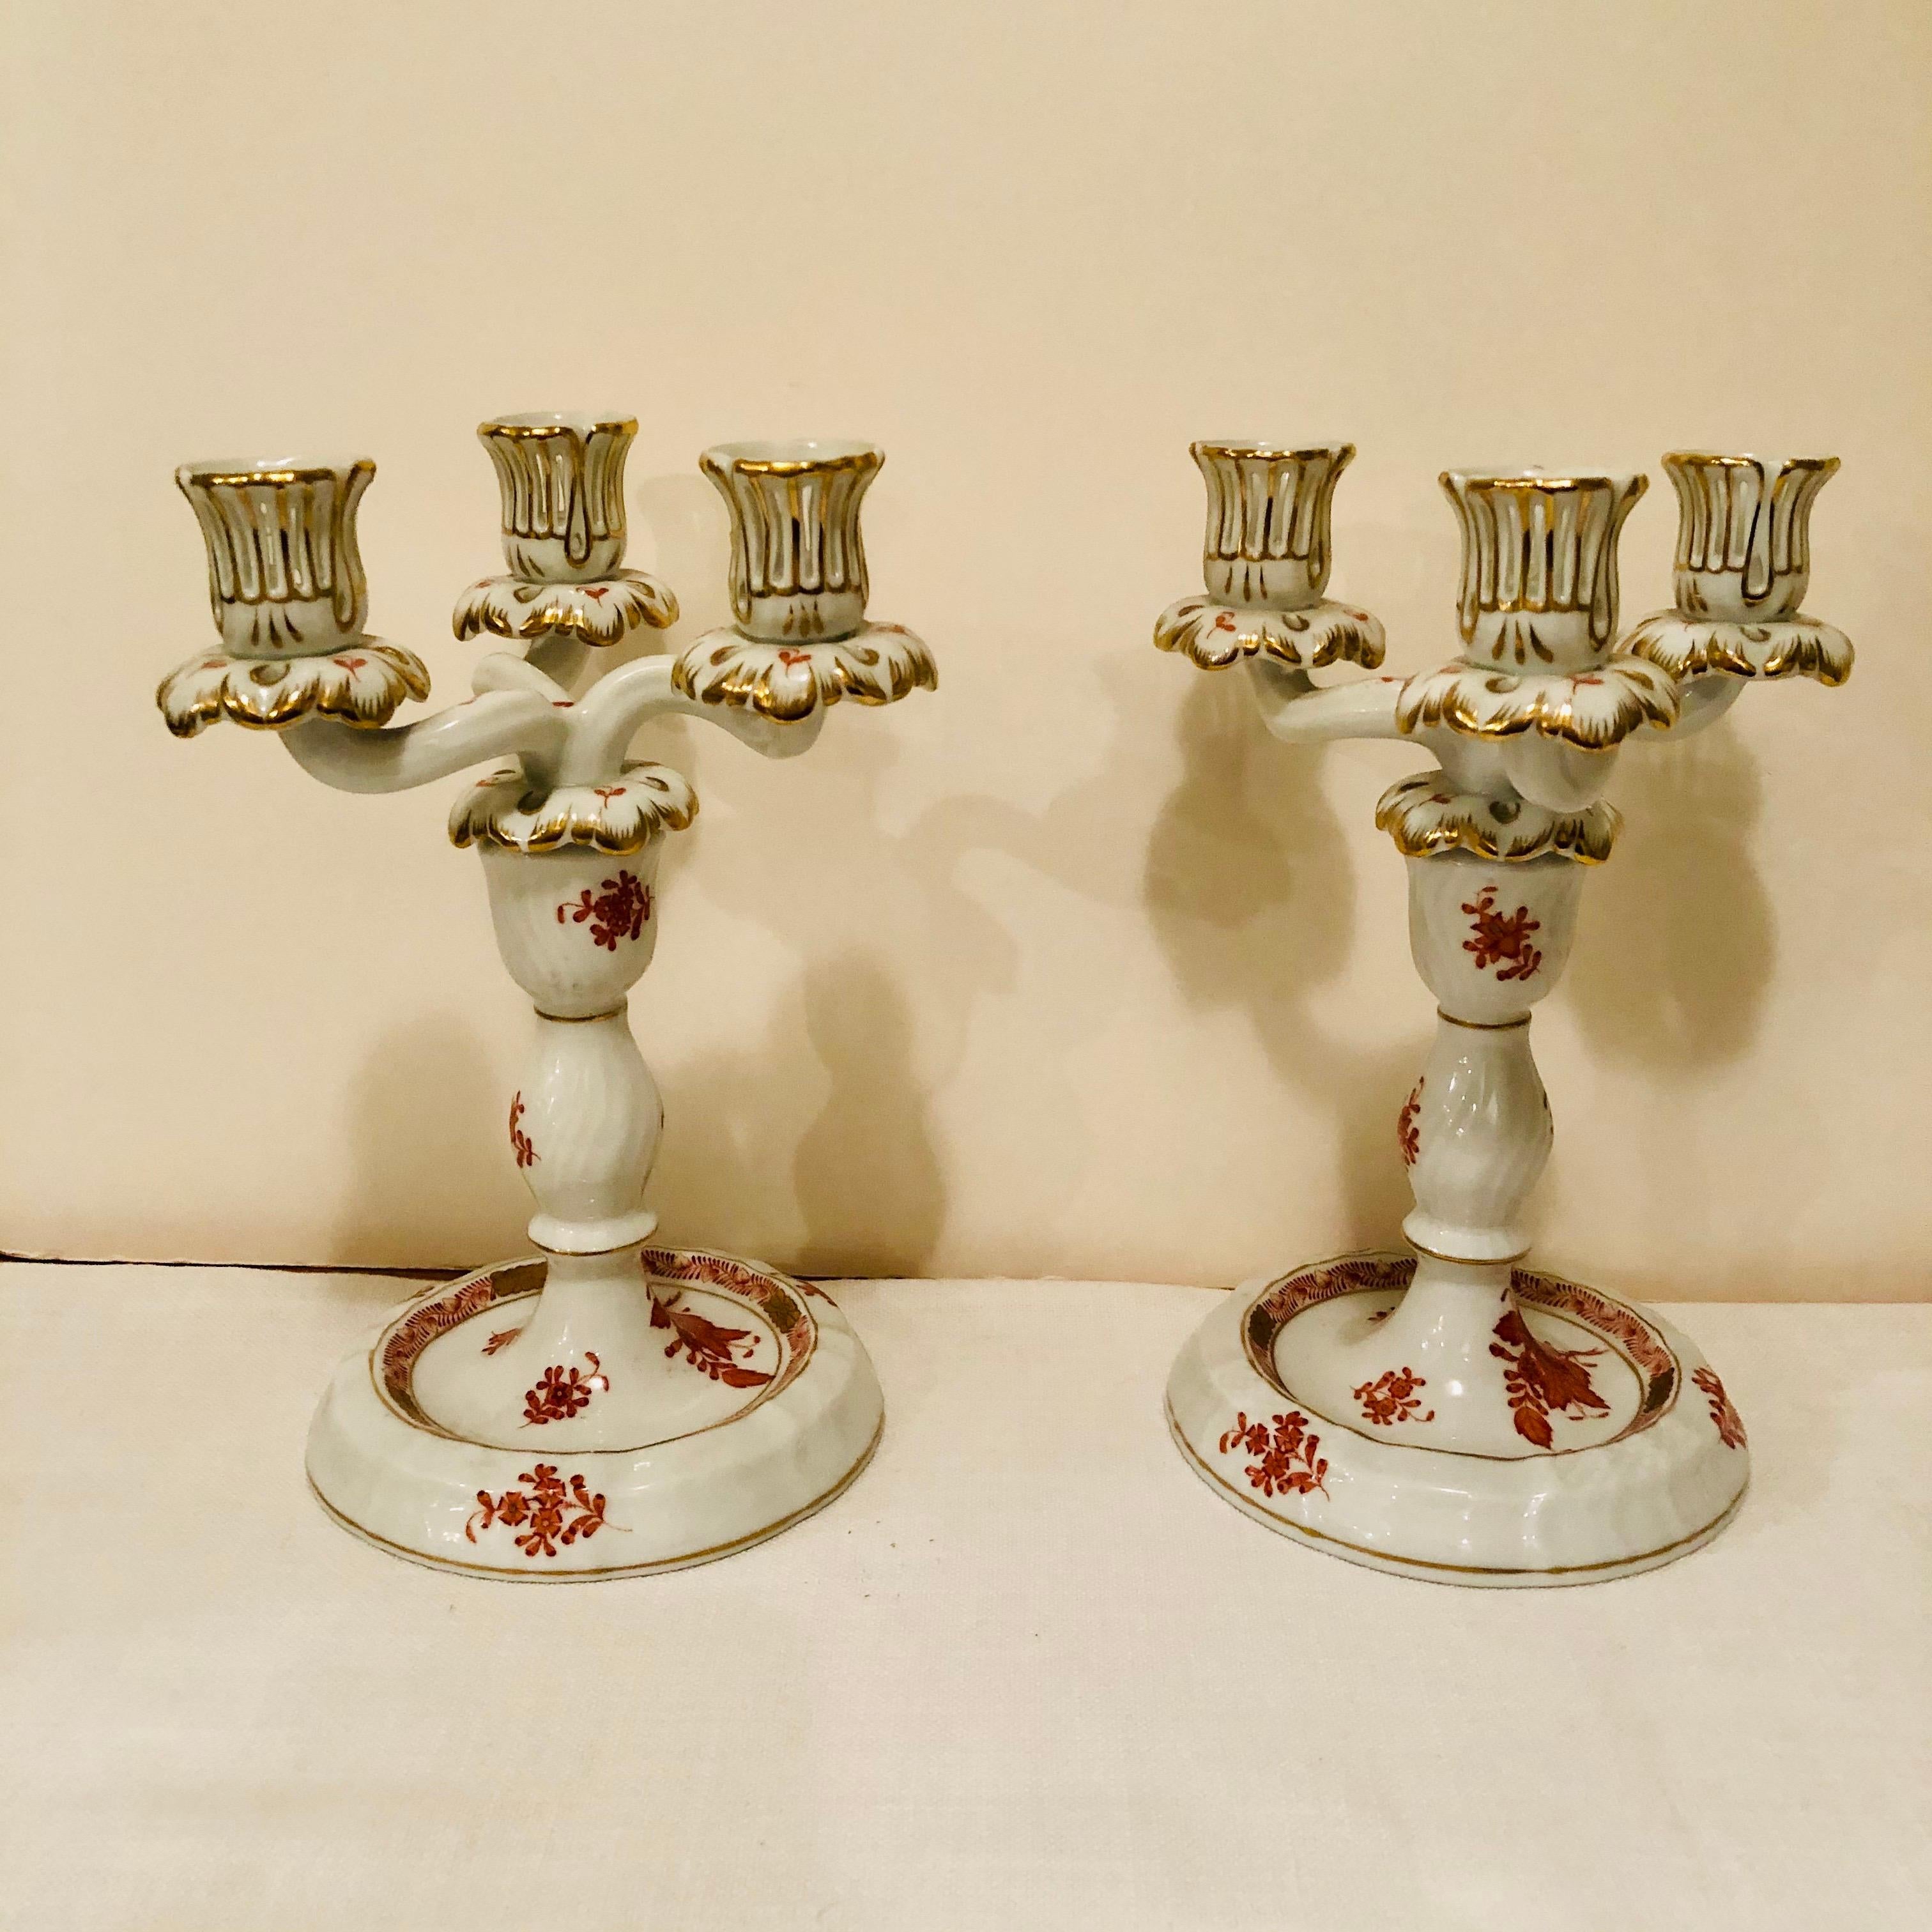 I want to offer you this stunning pair of Herend Chinese Bouquet candelabras in the rust/ apponyi orange design. Each of the candelabra has 3 arms to hold three candlesticks. Each candelabra is two pieces. If you take the top piece off, you can use